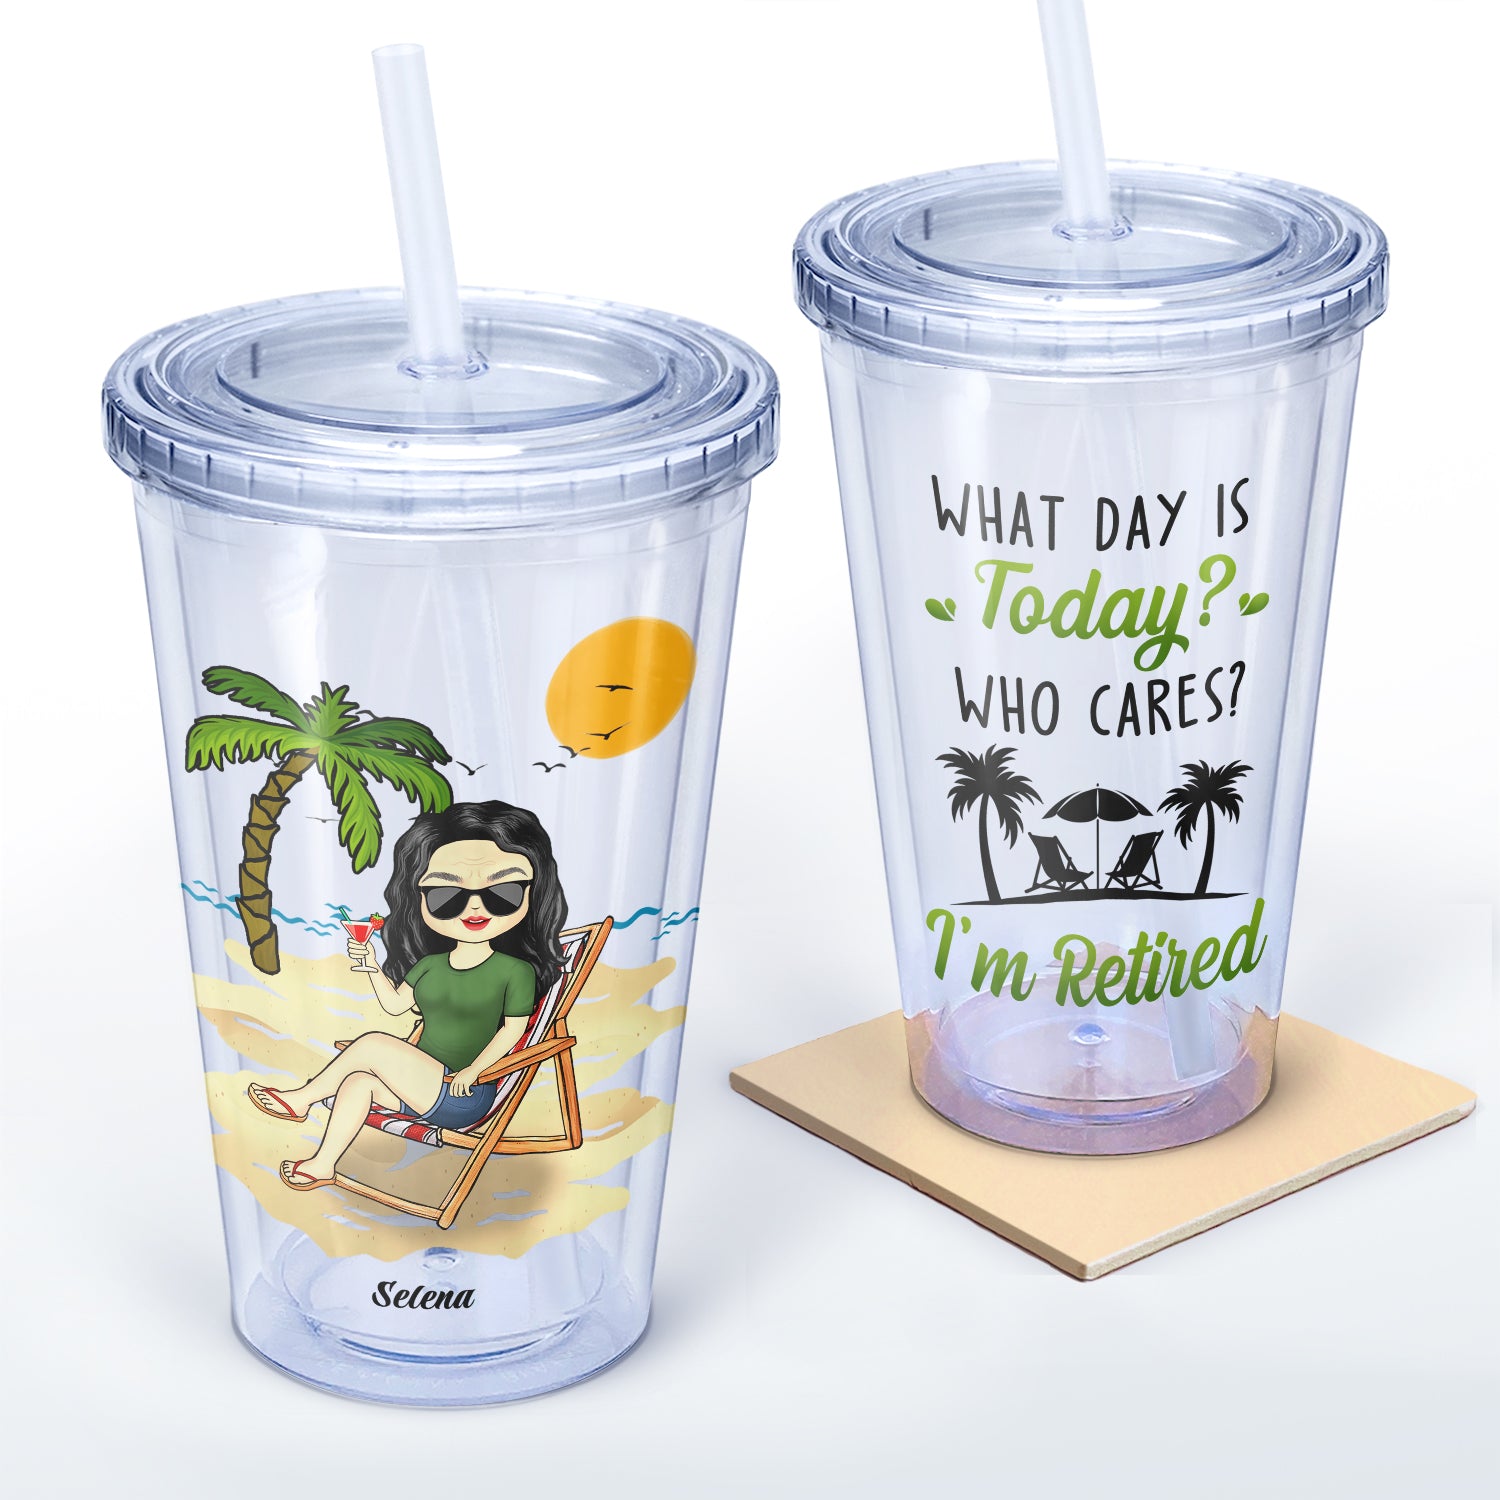 What Day Is Today Who Cares I'm Retired Summer Beach - Birthday, Retirement Gift For Yourself, Dad, Mom, Grandpa, Grandma, BFF Best Friends, Colleagues - Personalized Acrylic Insulated Tumbler With Straw